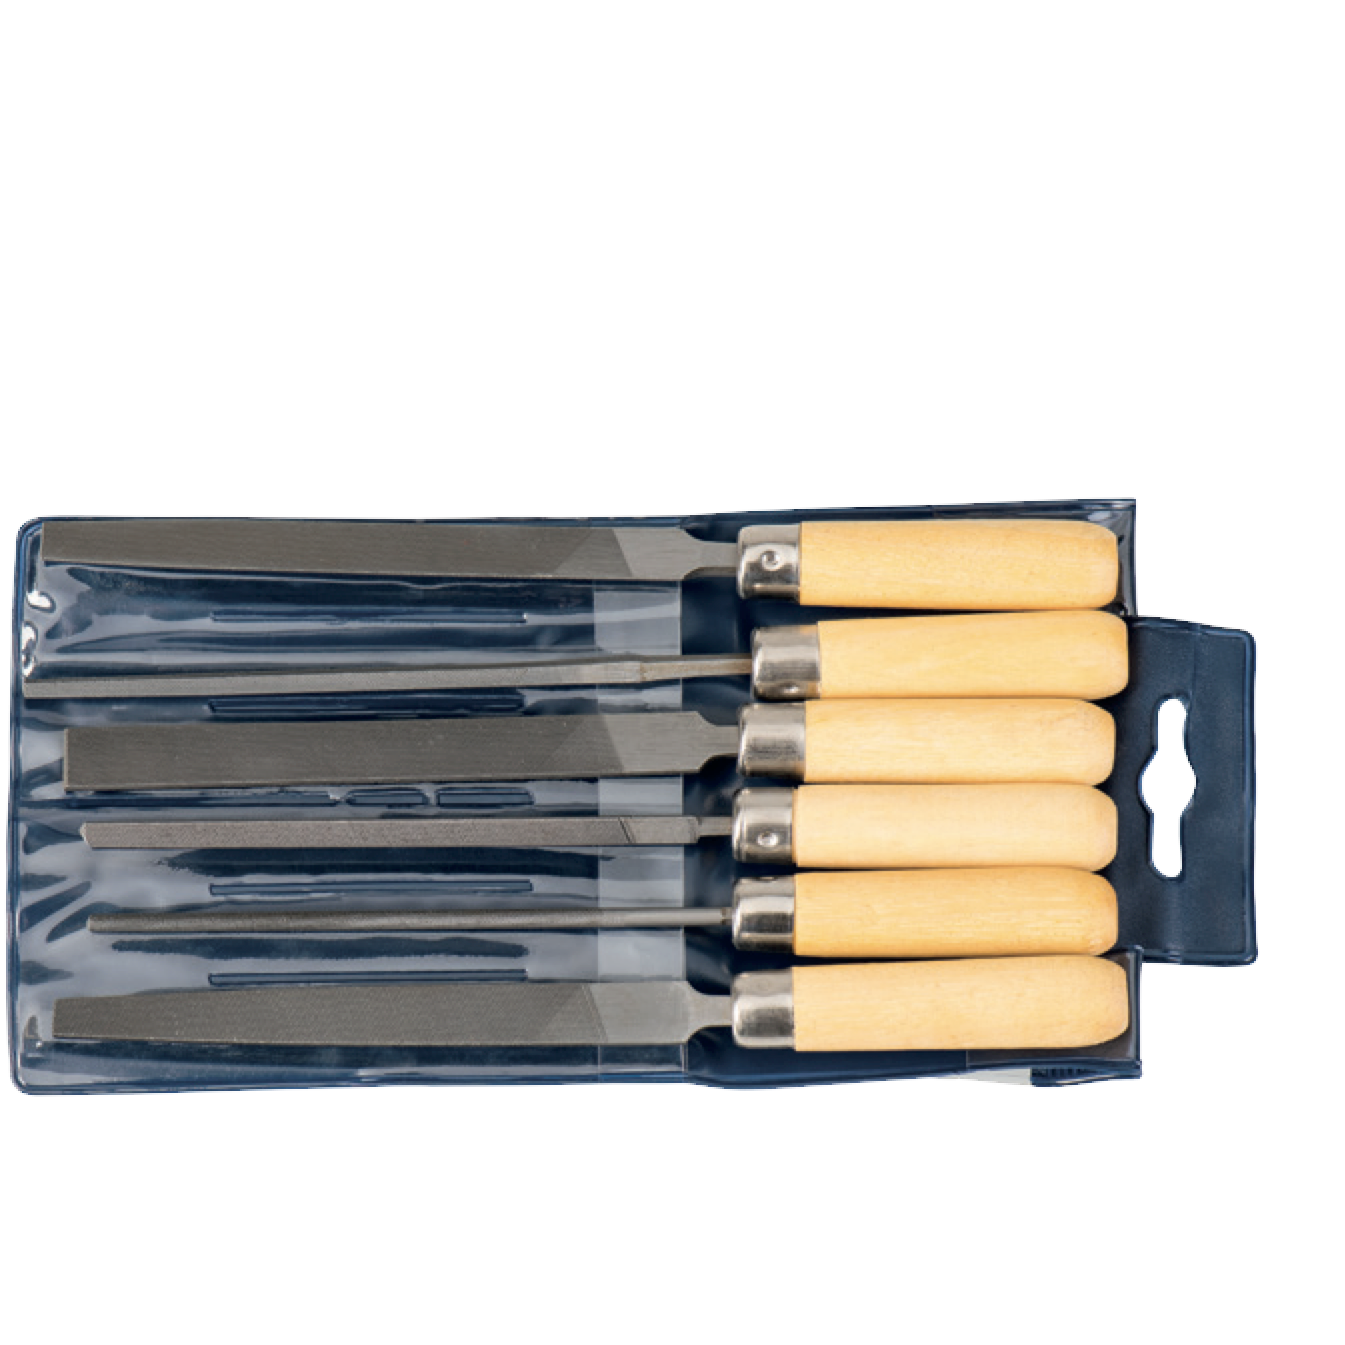 ELORA 254S-HK Key File Set With Wooden Handle (ELORA Tools) - Premium Key File Set from ELORA - Shop now at Yew Aik.